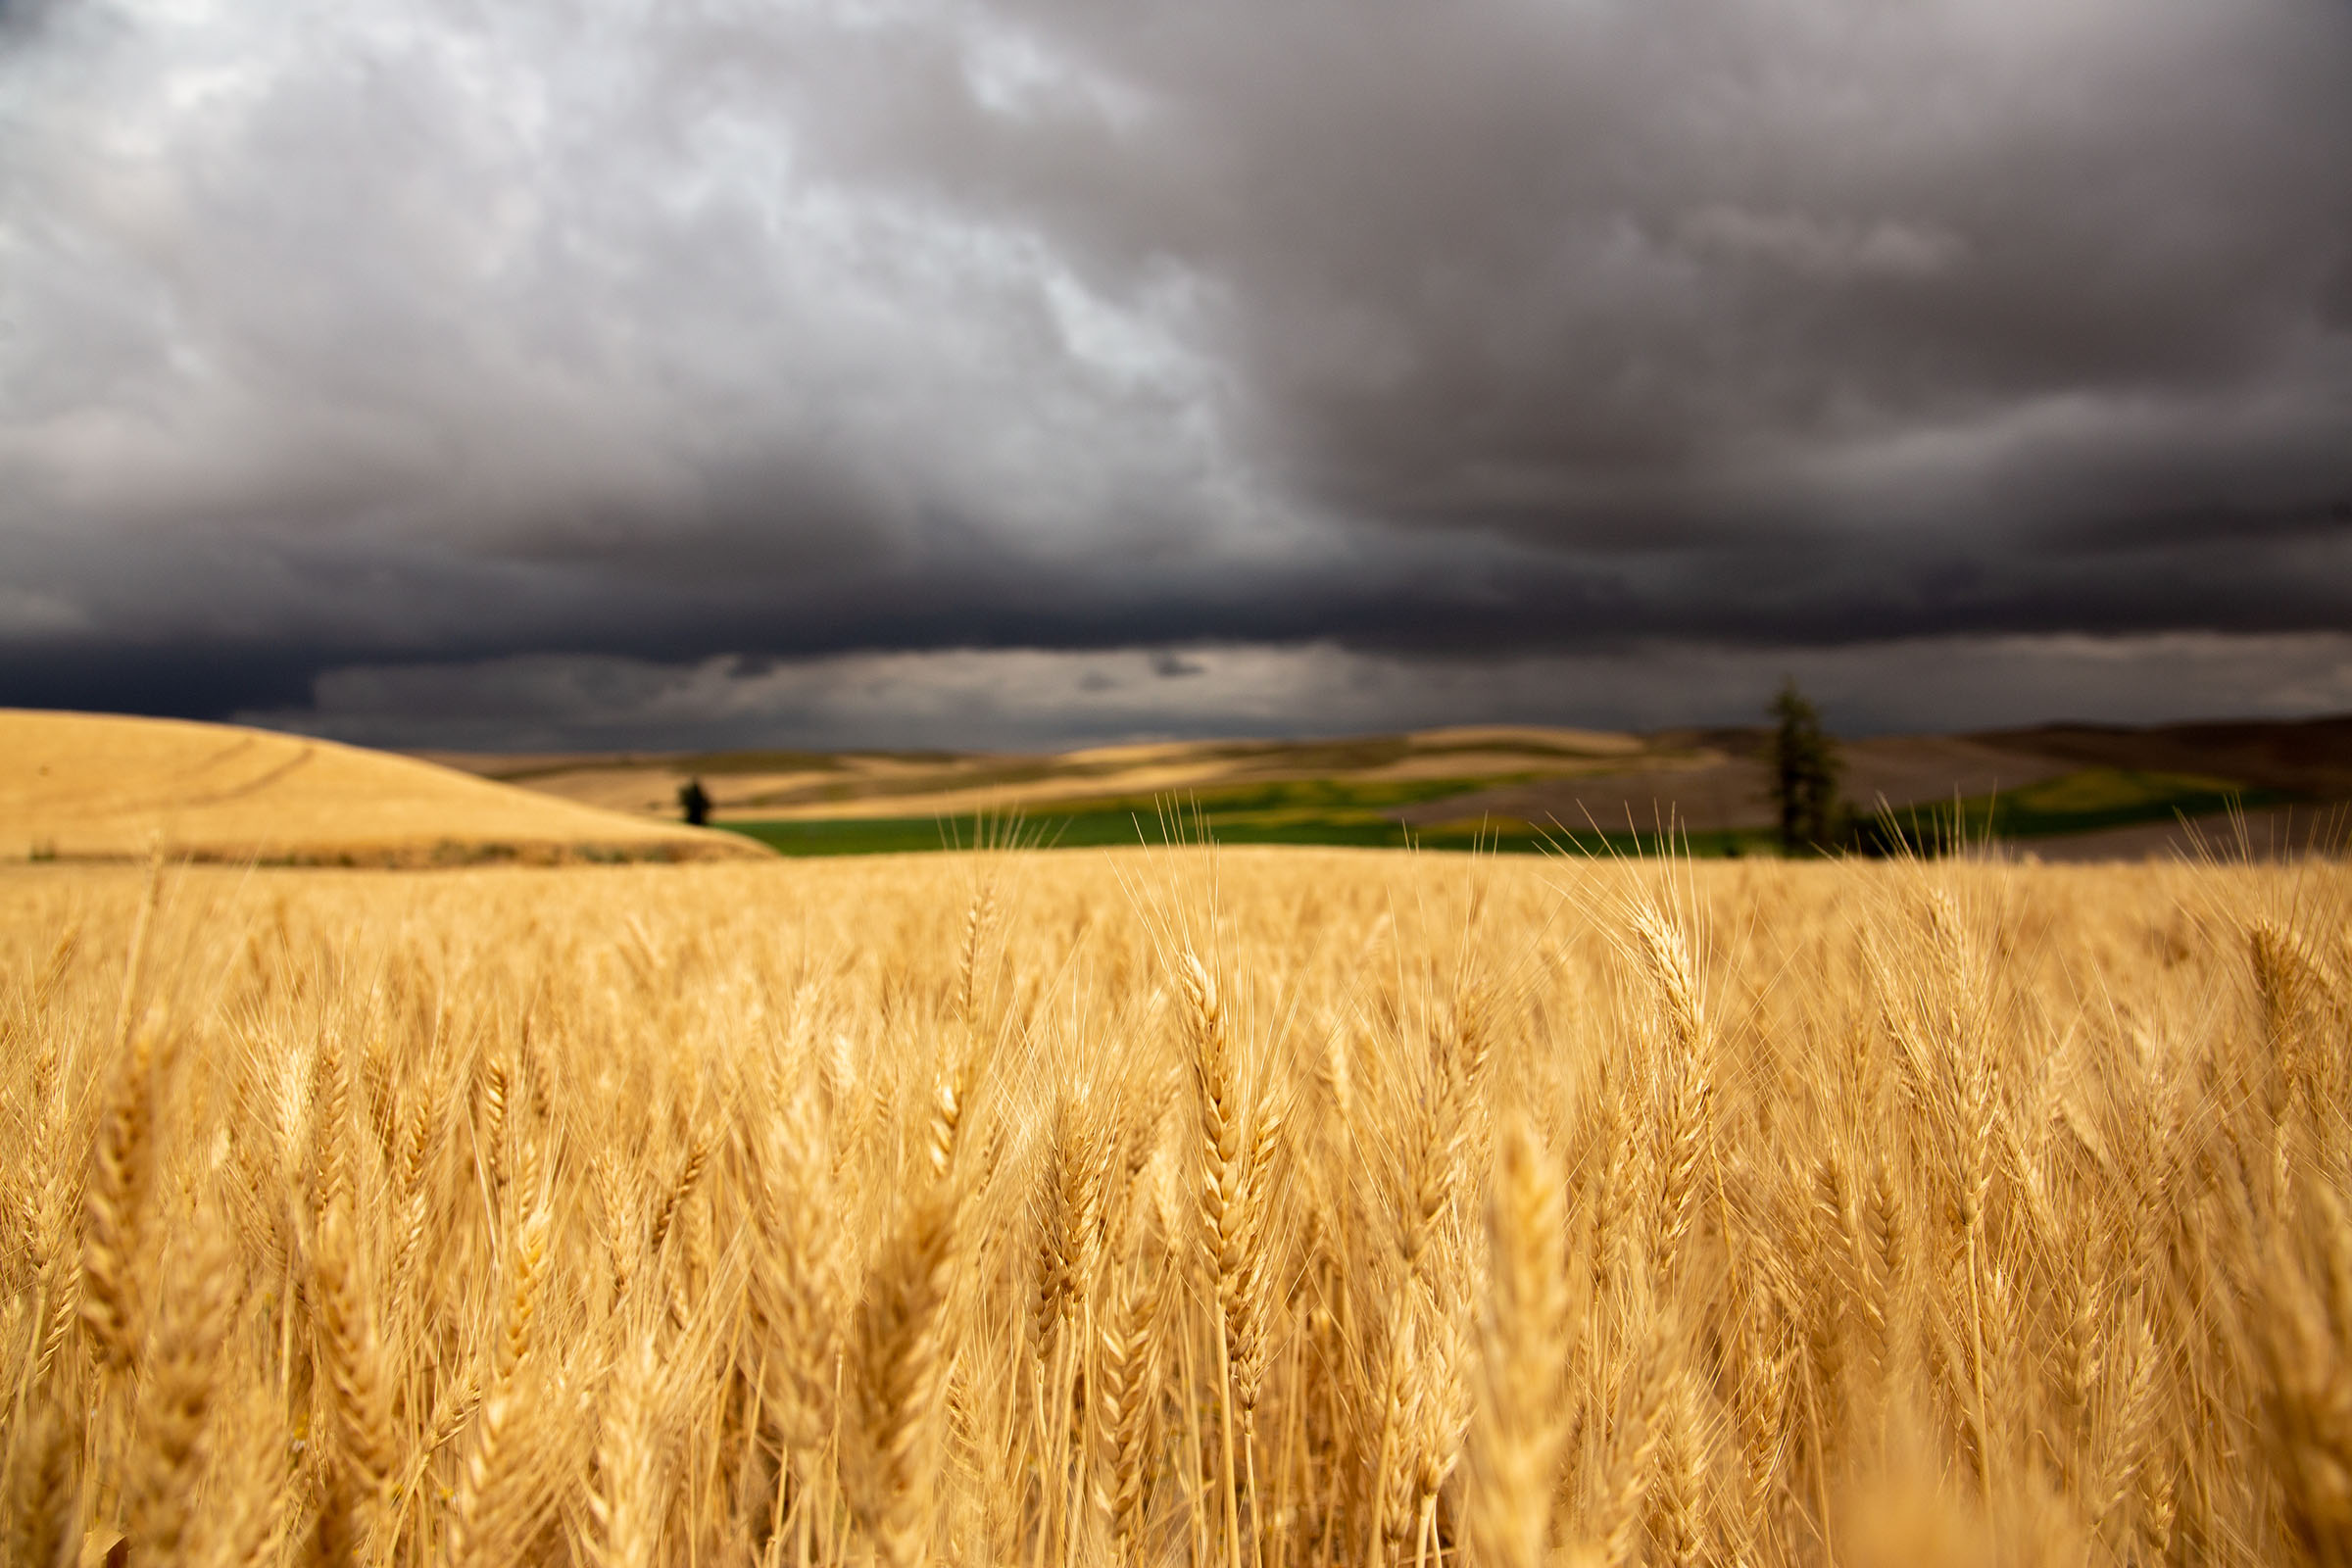 A mature soft white wheat field in the Pacific Northwest on a stormy day showing the impact of La Nina on wheat production.